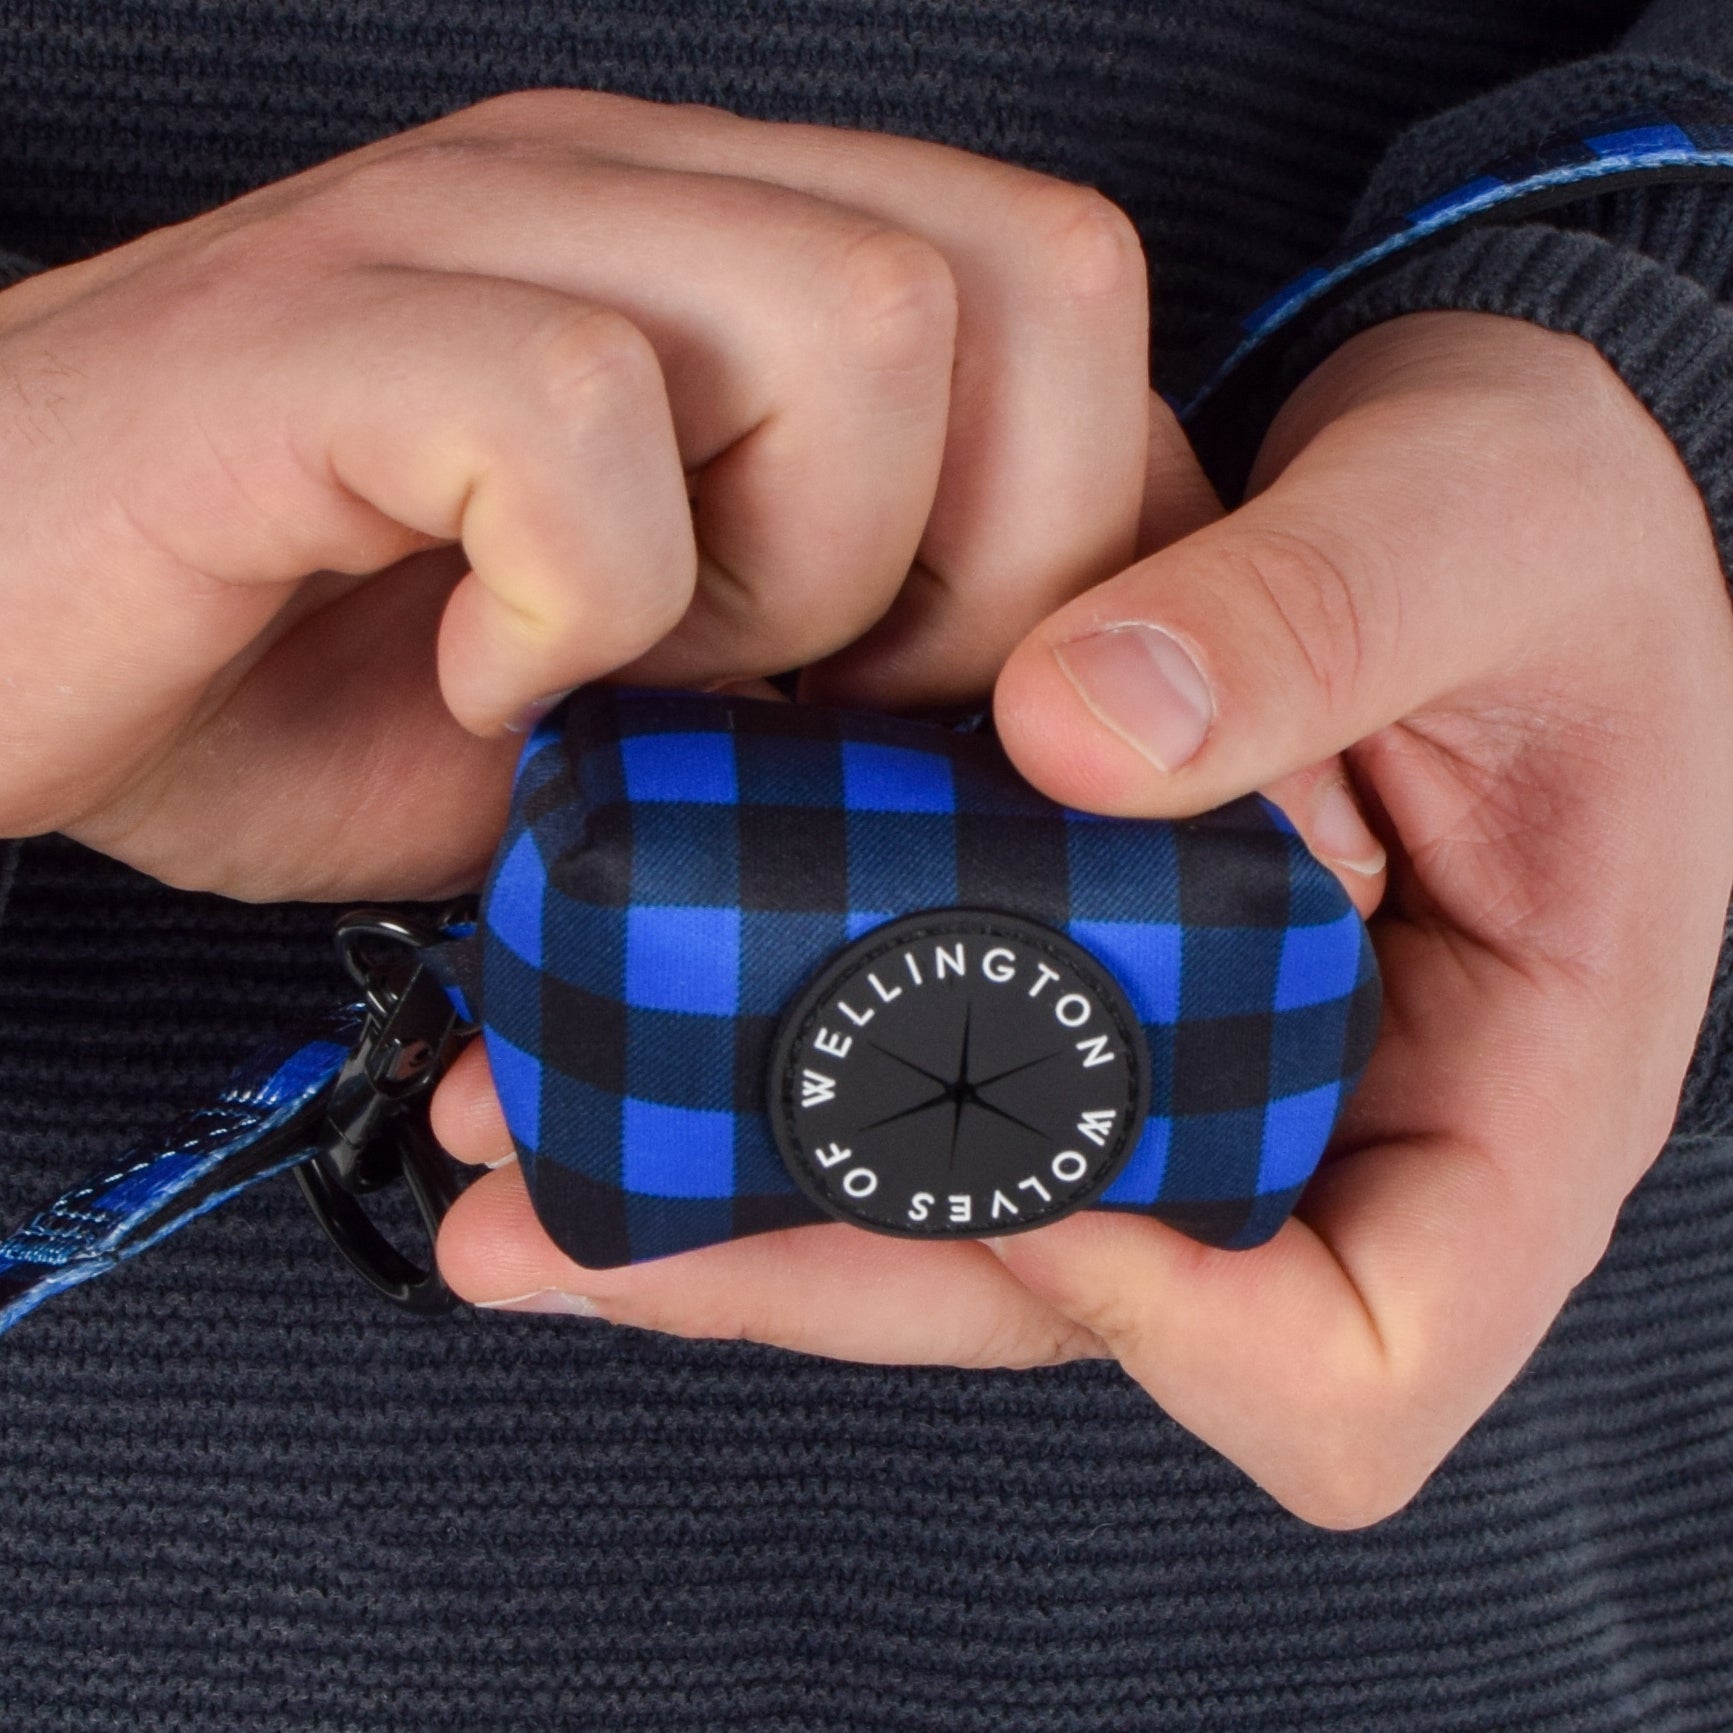 Neoprene dog poop bag pouch in blue and black check pattern.